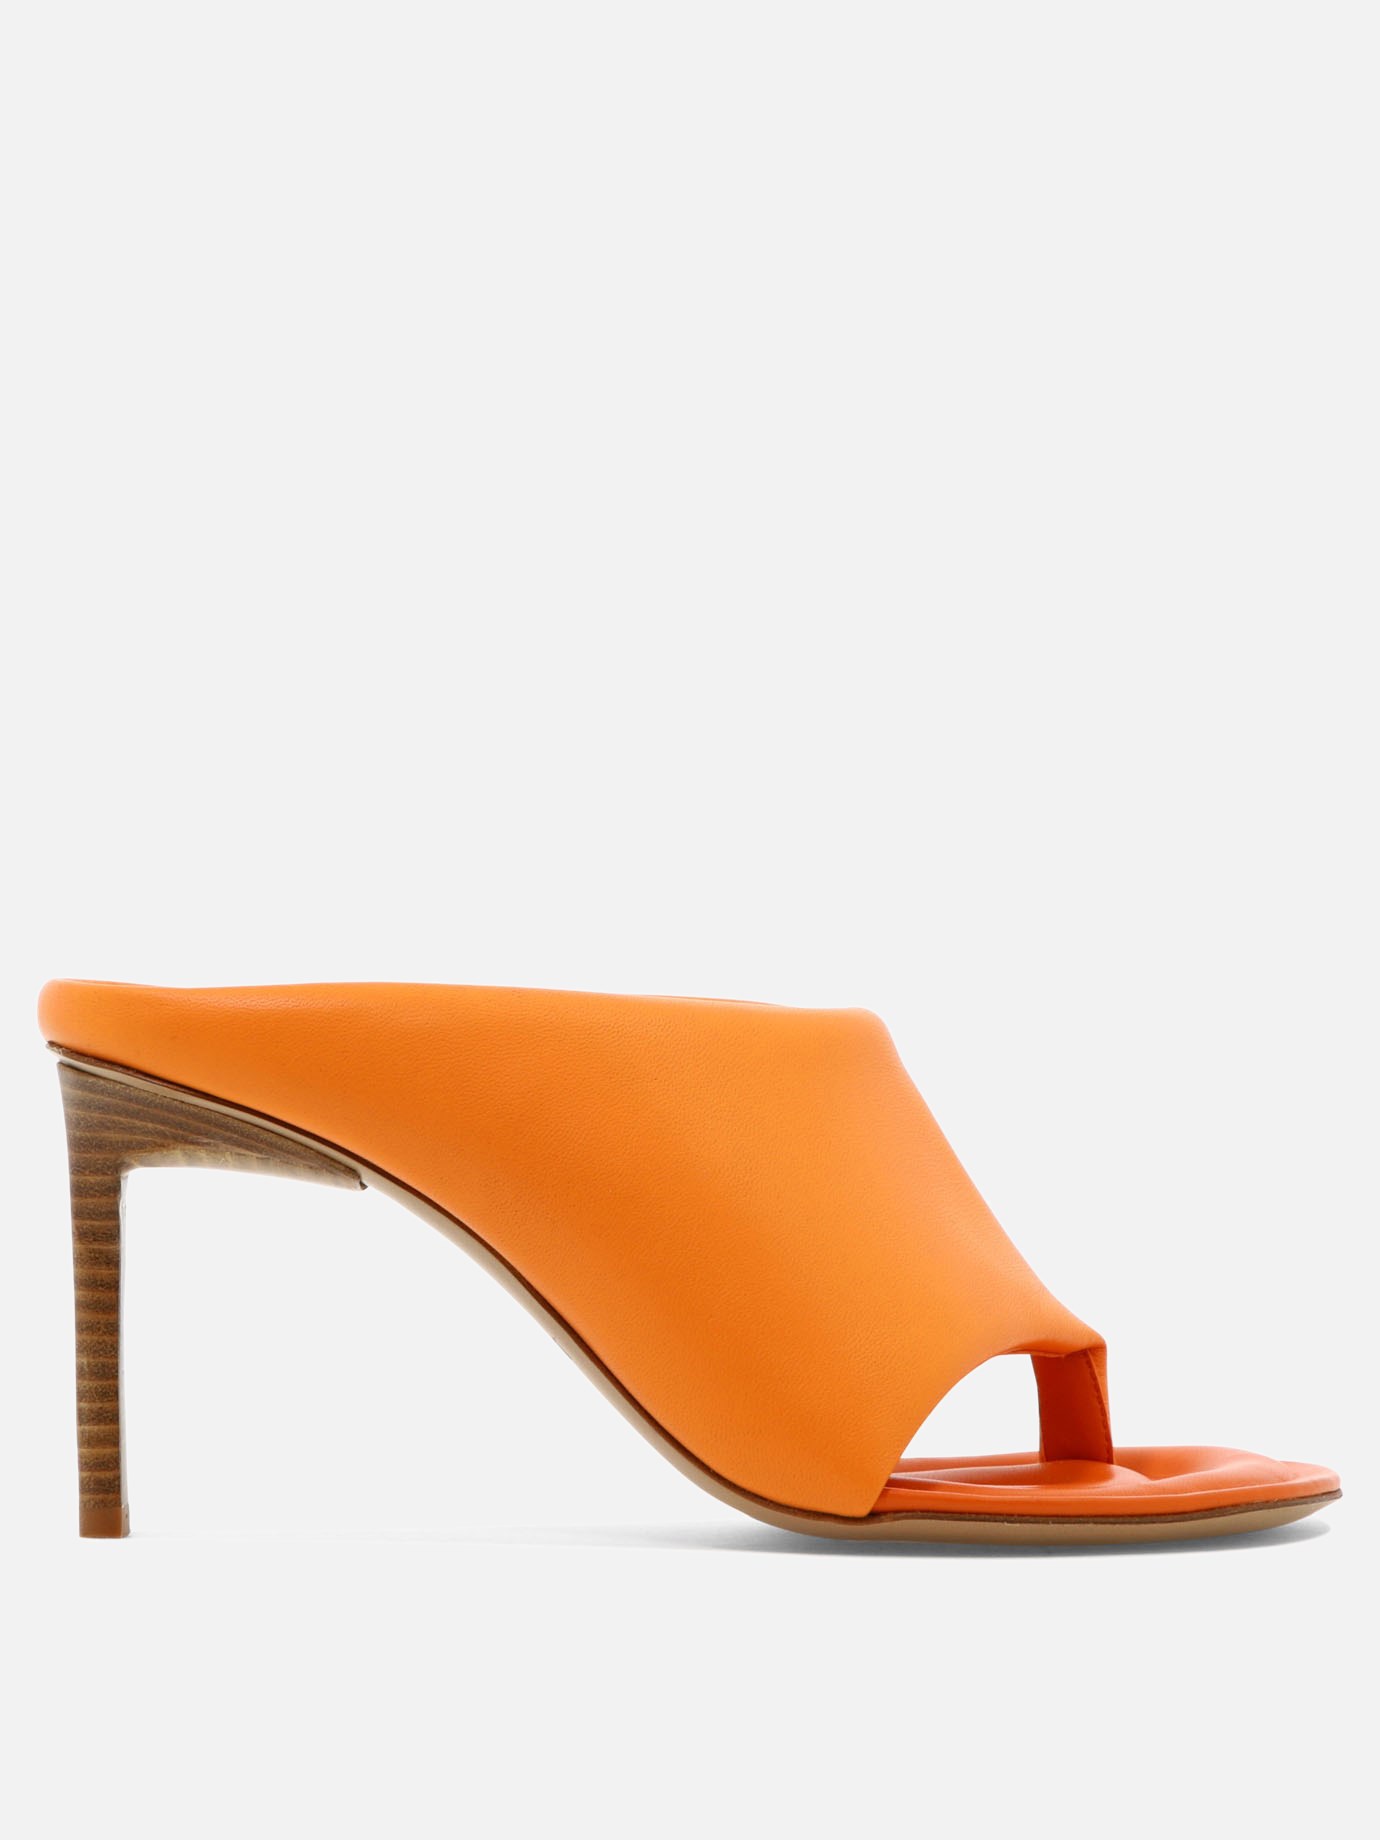  Limone  sandalsby Jacquemus - 5